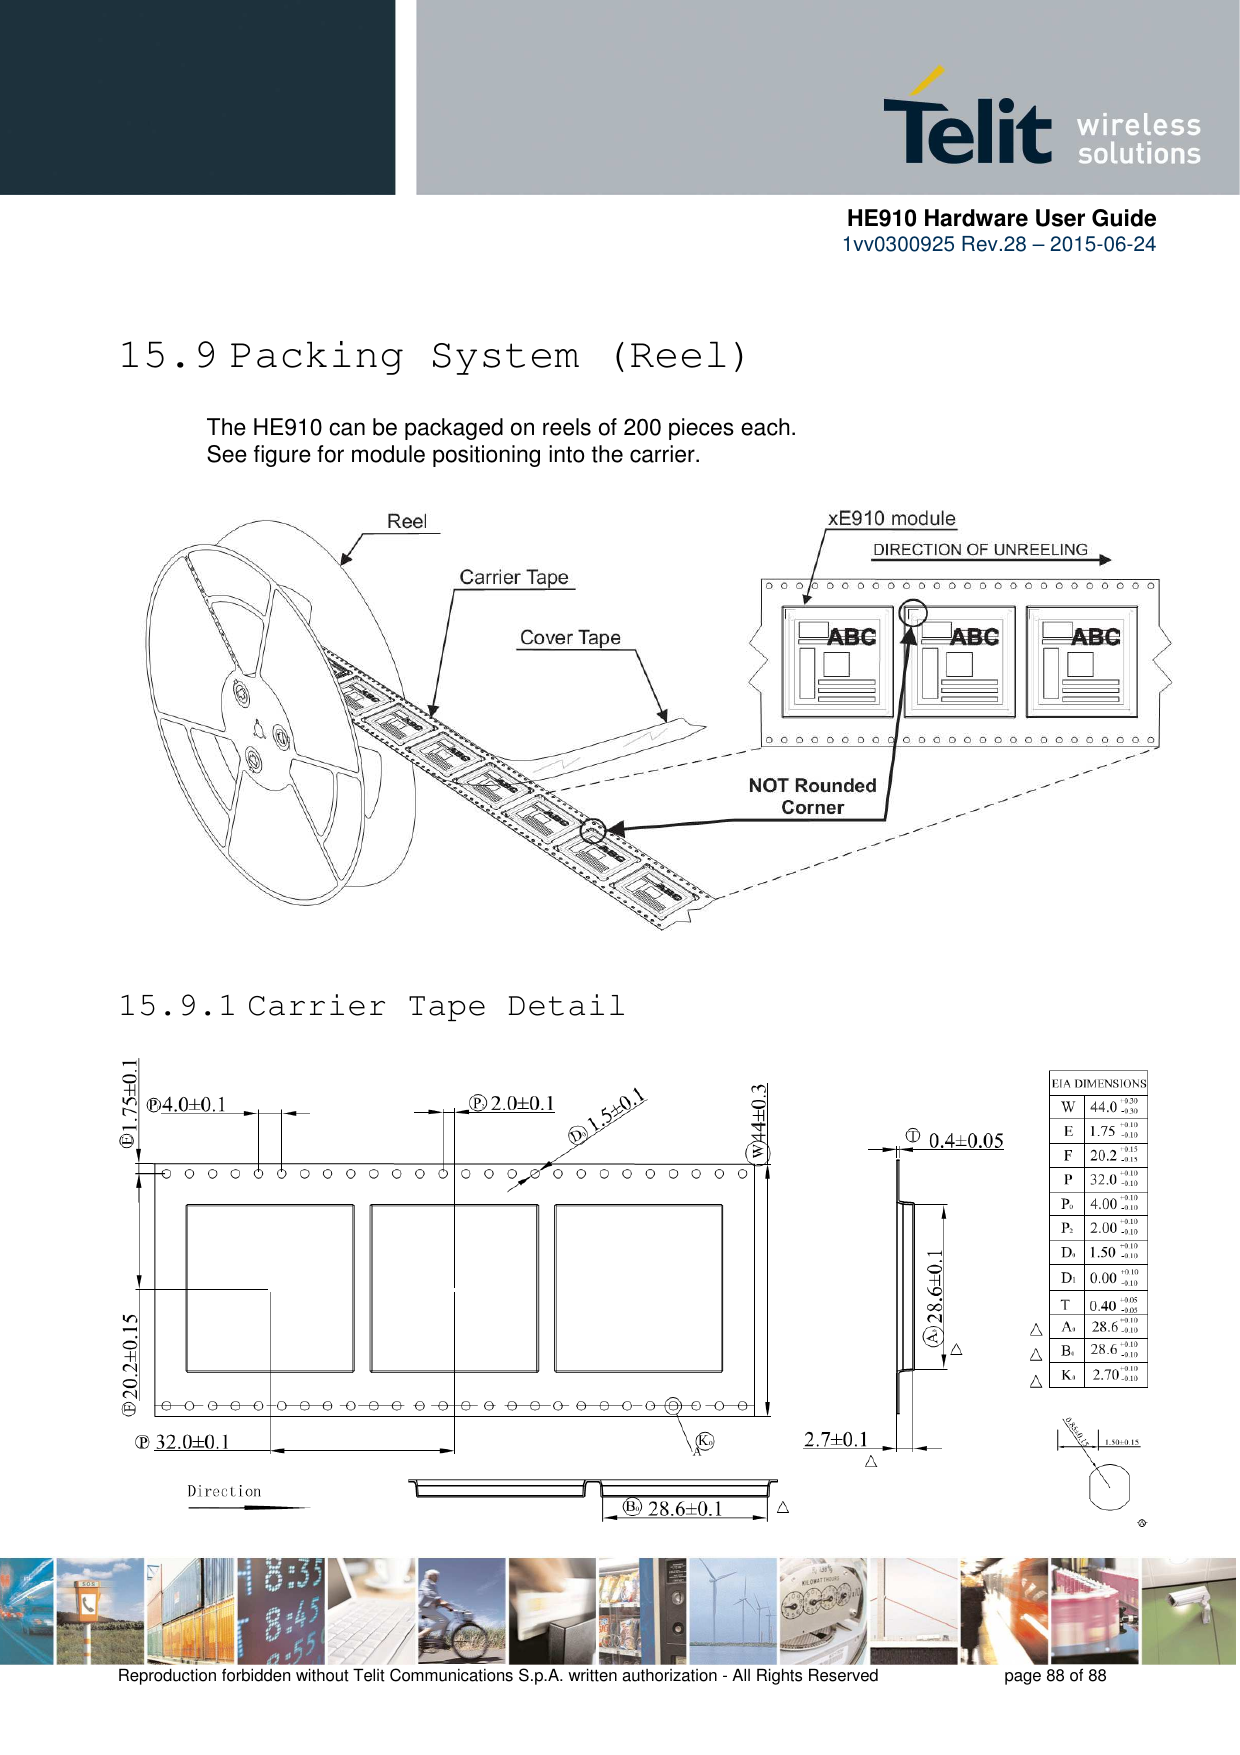      HE910 Hardware User Guide 1vv0300925 Rev.28 – 2015-06-24    Reproduction forbidden without Telit Communications S.p.A. written authorization - All Rights Reserved    page 88 of 88   15.9 Packing System (Reel) The HE910 can be packaged on reels of 200 pieces each.  See figure for module positioning into the carrier.   15.9.1 Carrier Tape Detail 